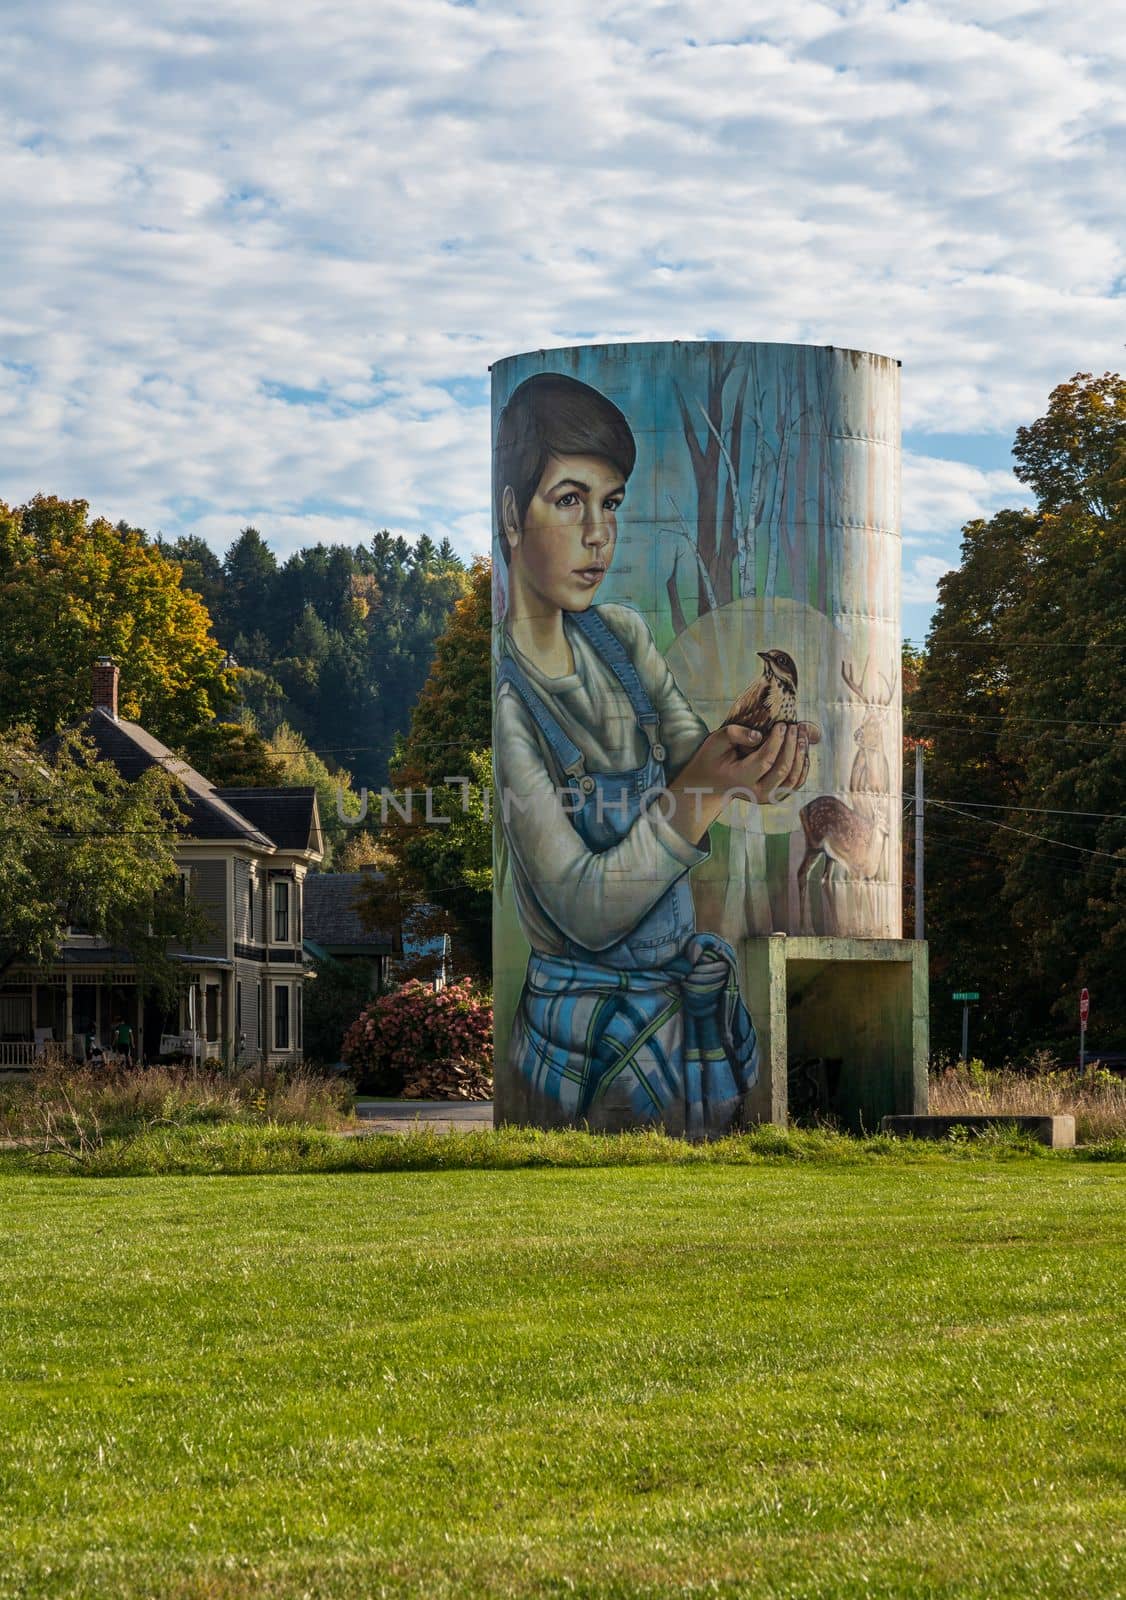 Jefferson, VT - 1 October 2022: Mural by Sarah Rutherford on concrete silo representing the seasons